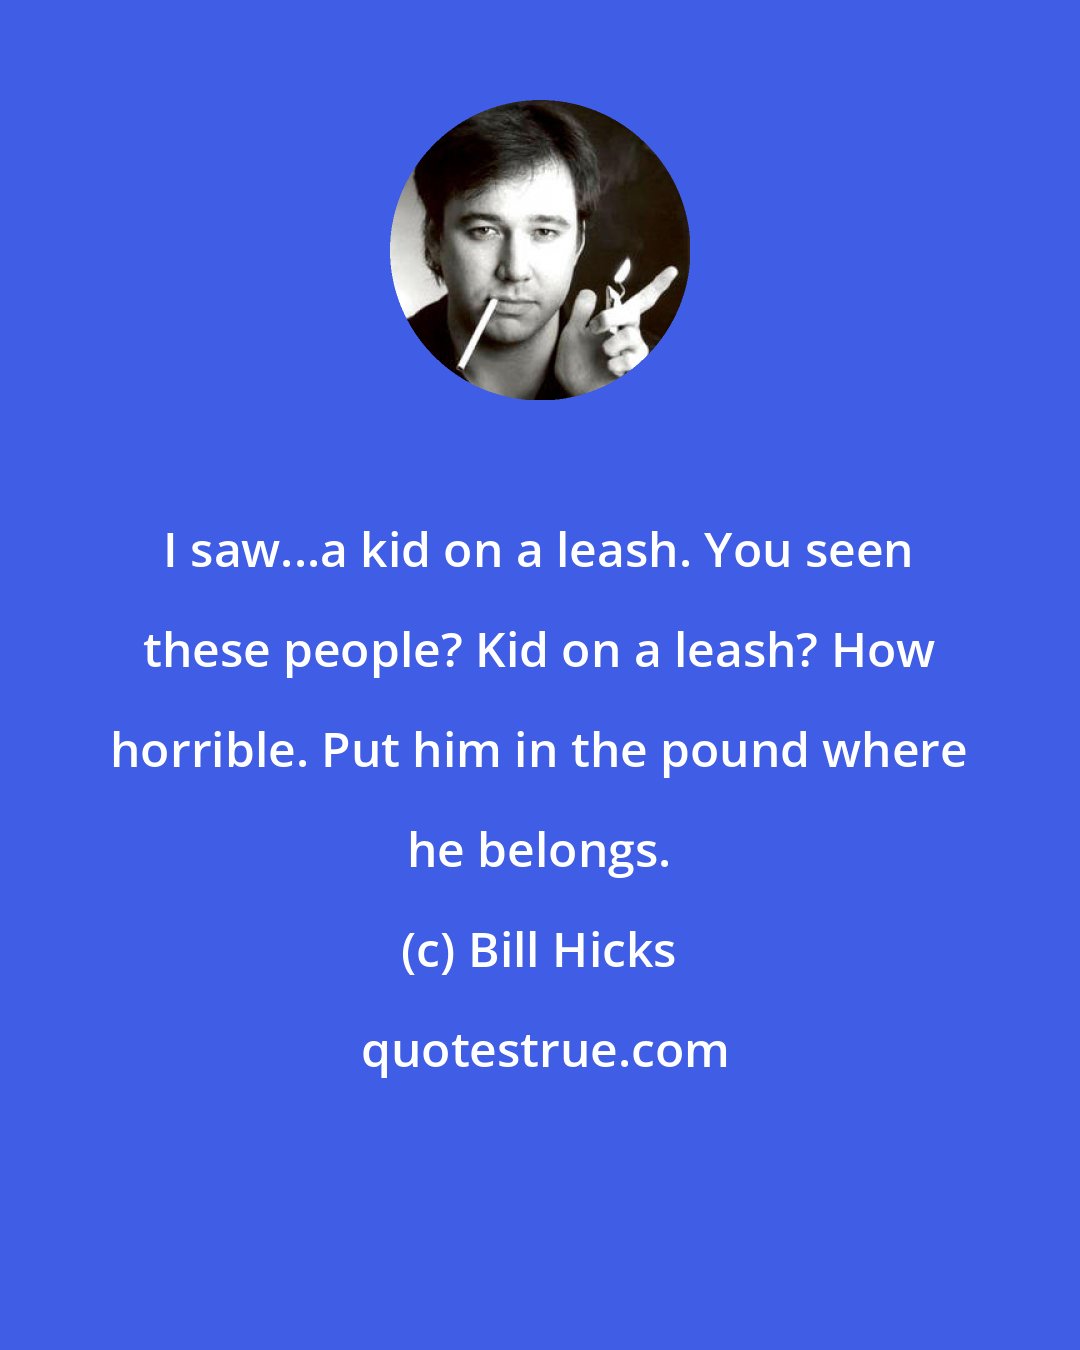 Bill Hicks: I saw...a kid on a leash. You seen these people? Kid on a leash? How horrible. Put him in the pound where he belongs.